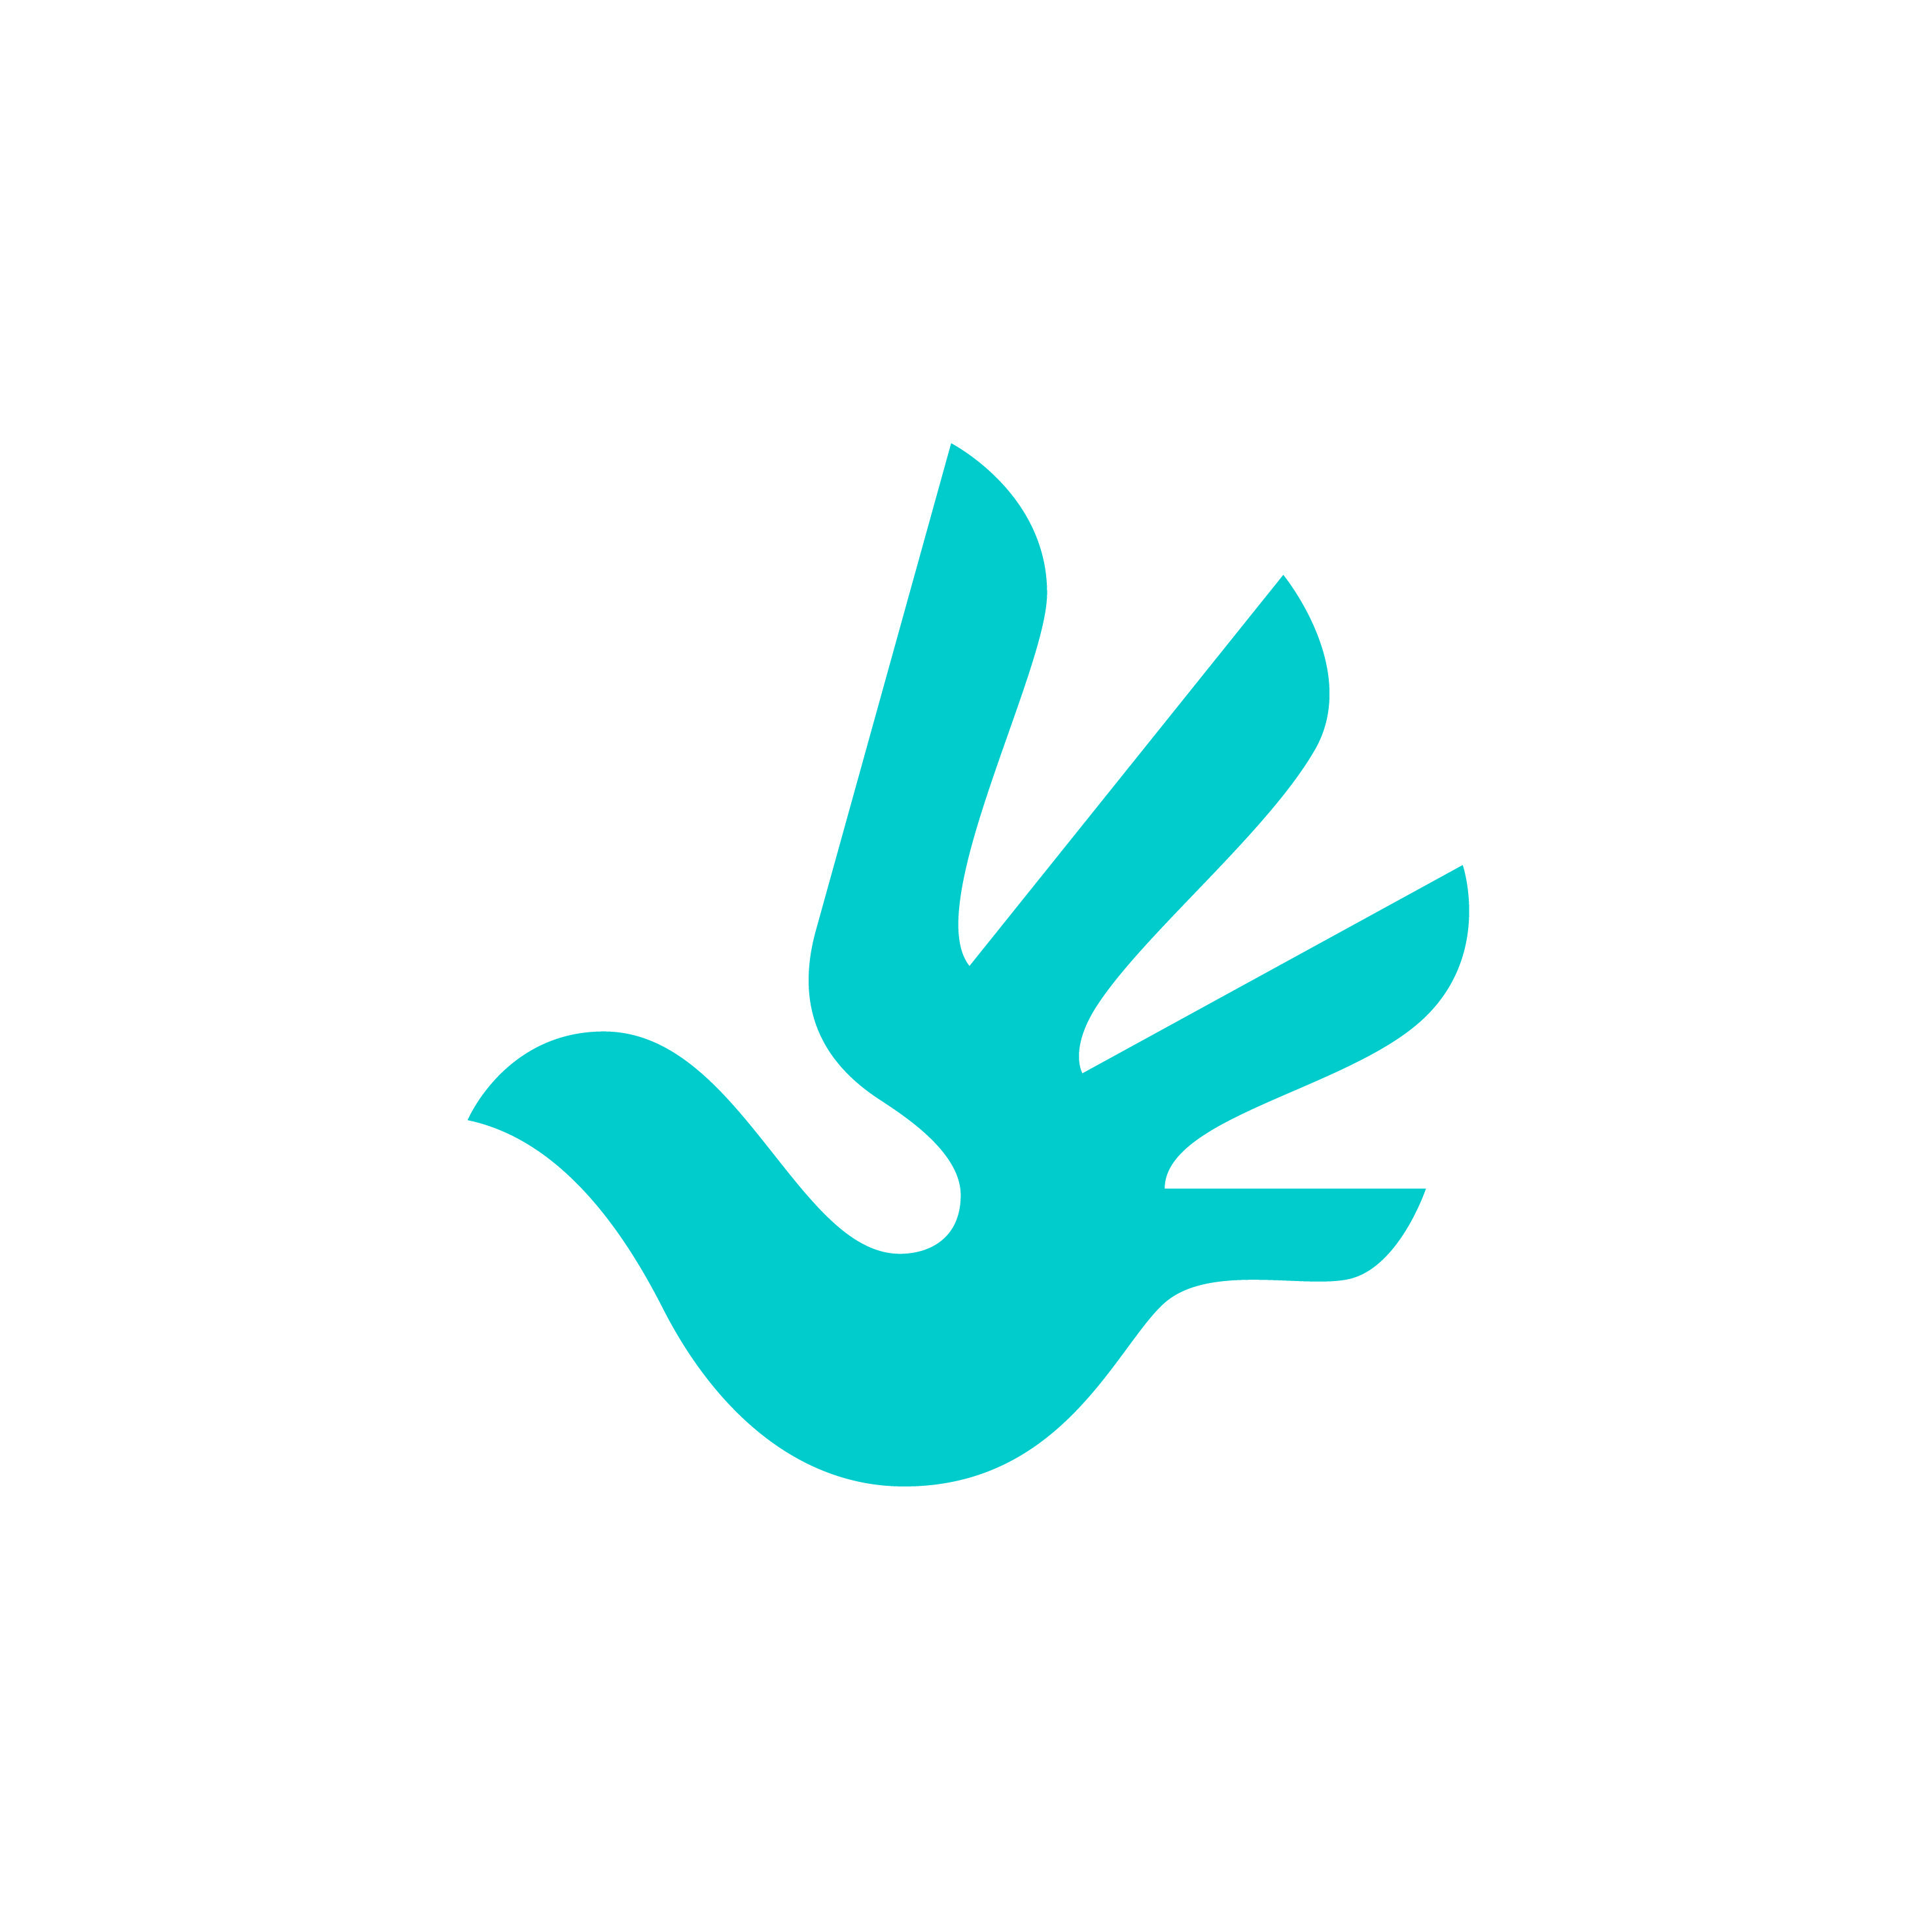 Teal Logo - Downloads | The Universal Logo For Human Rights